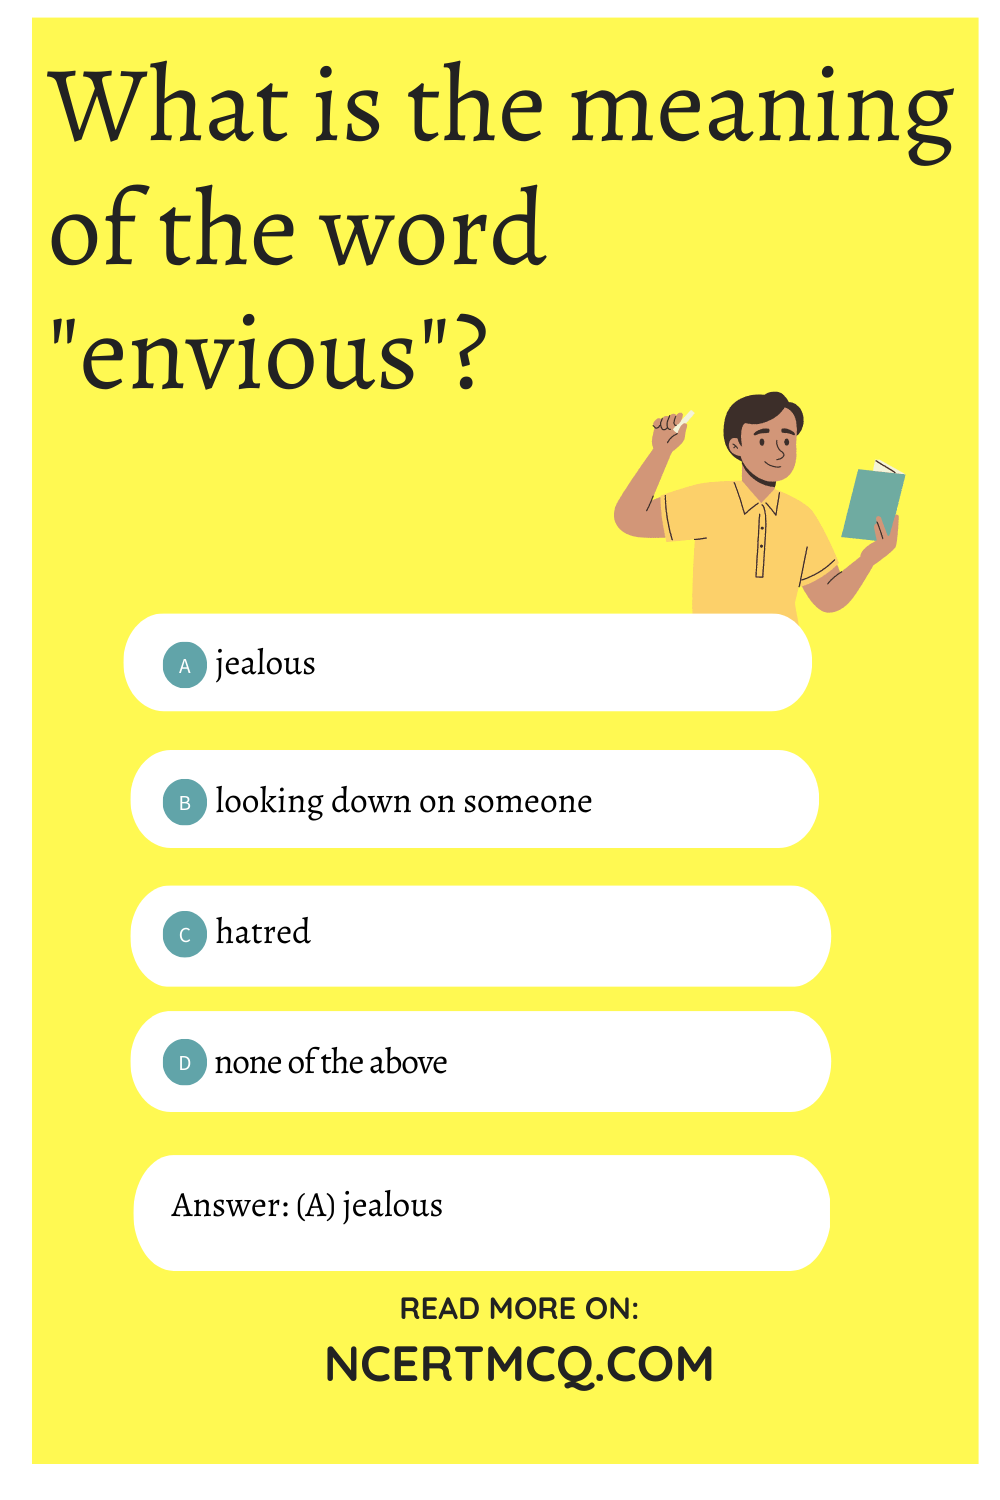 What is the meaning of the word "envious"?